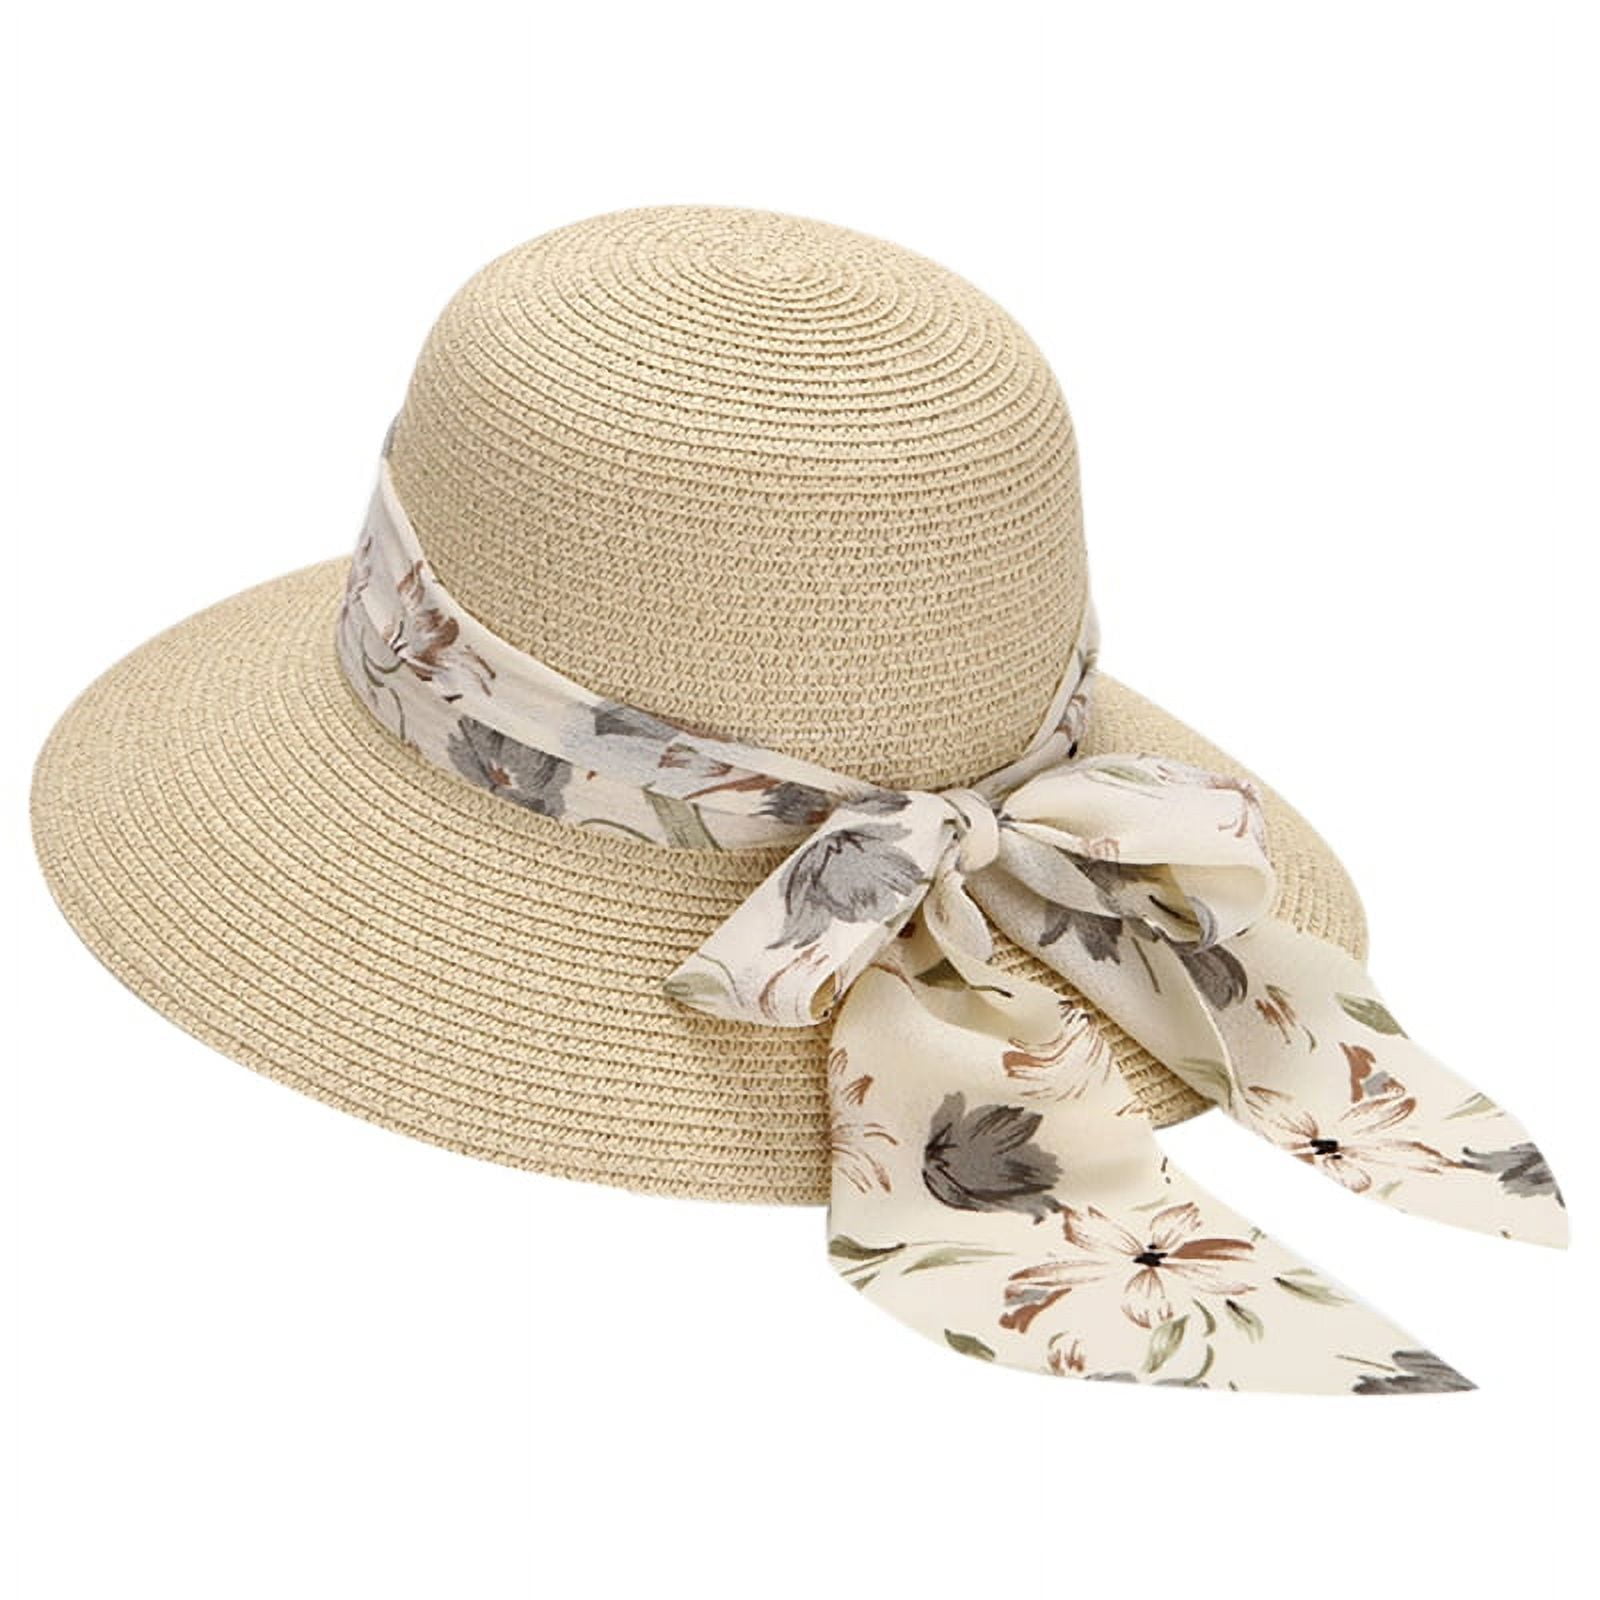 Straw Sun Hats For Women Wide Brim Fedora Foldable Straw Beach Hat Outdoor  Fashion Casual Style Hat For Women Girls Valentine's Gifts For Her